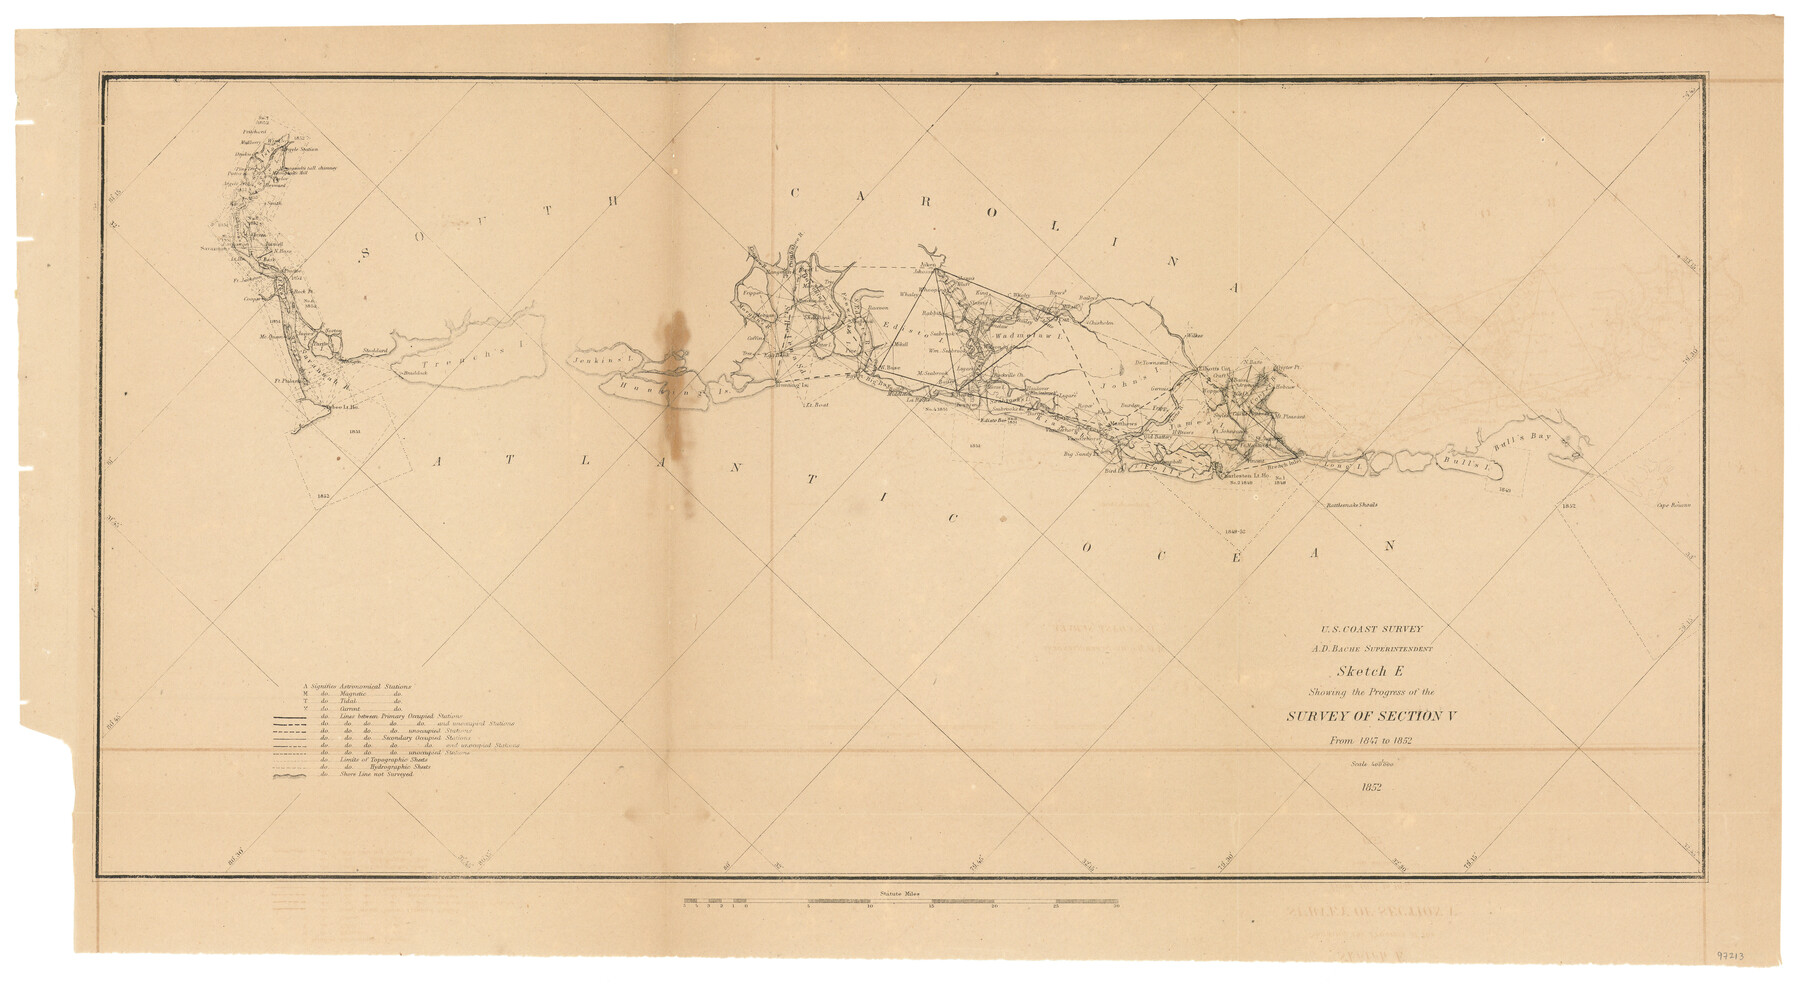 97213, Sketch E Showing the Progress of the Survey of Section V From 1847 to 1852, General Map Collection